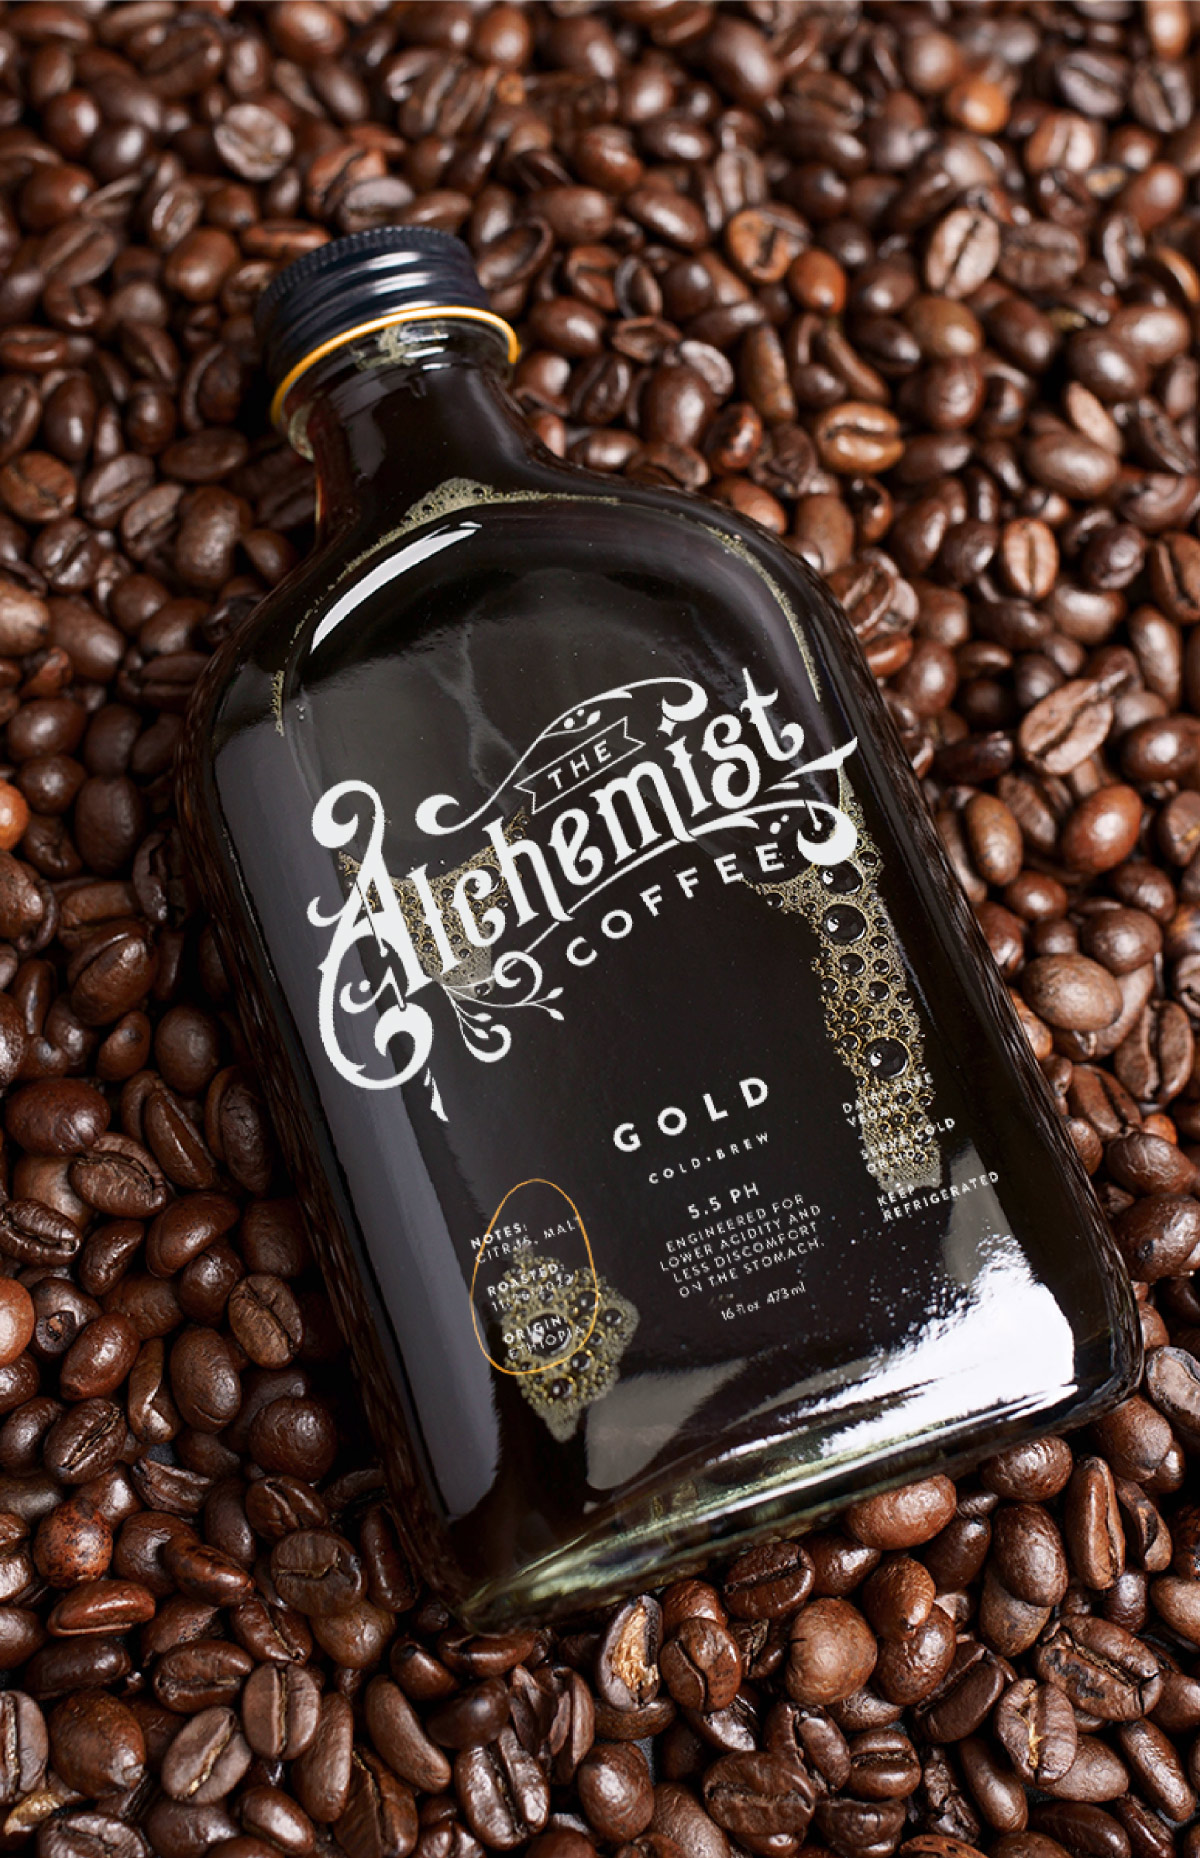 Glass coffee bottle with a vintage packaging laying on a bed of coffee beans